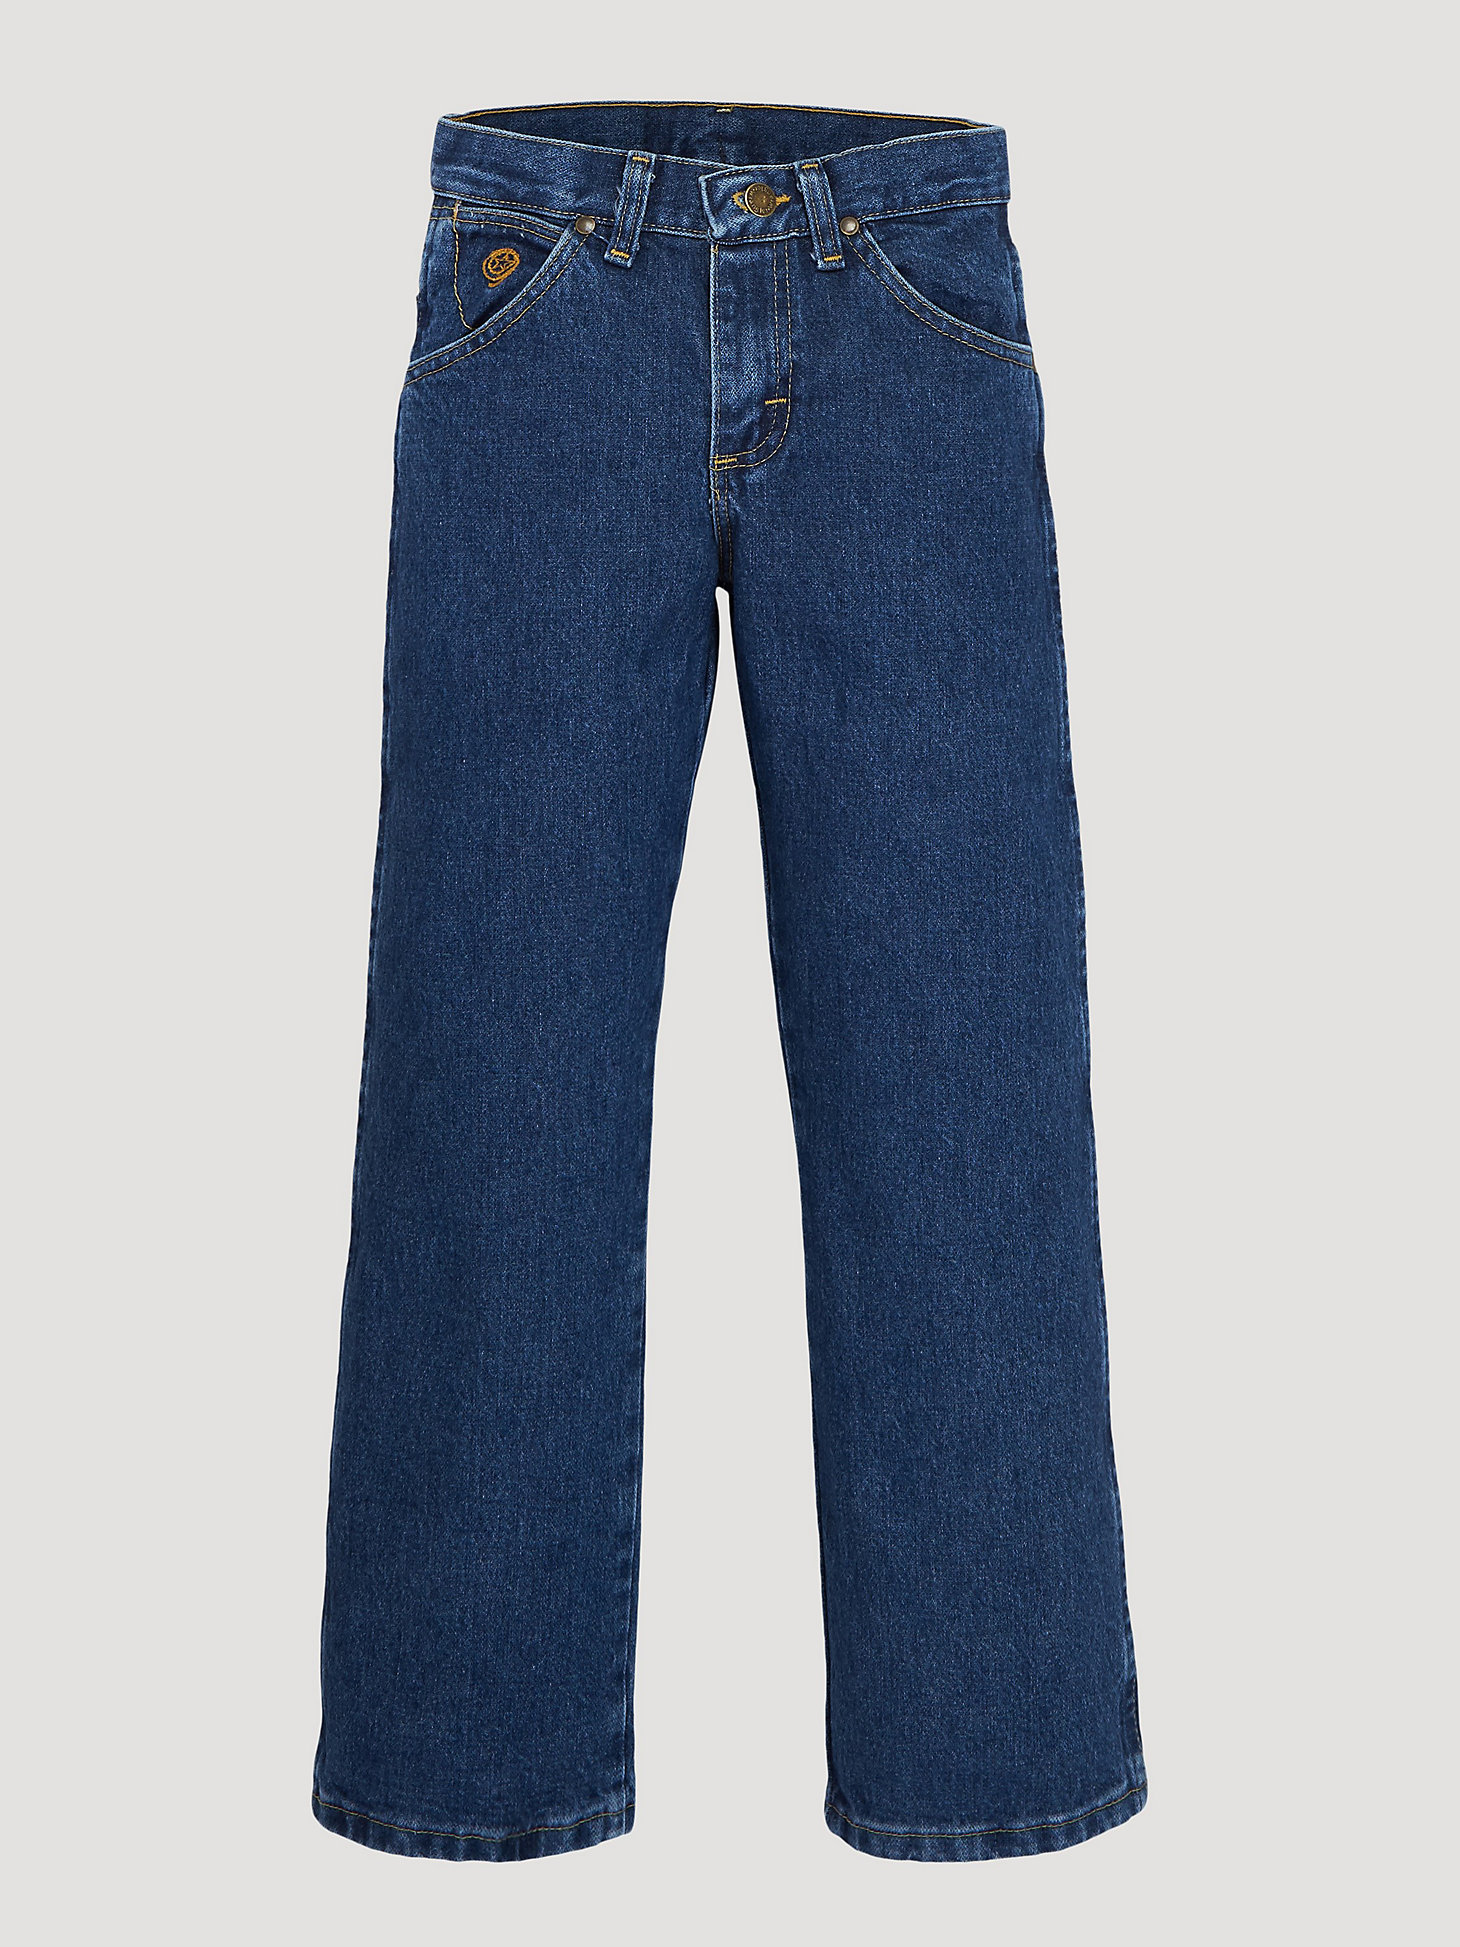 UNISEX TODDLERS JEANS 